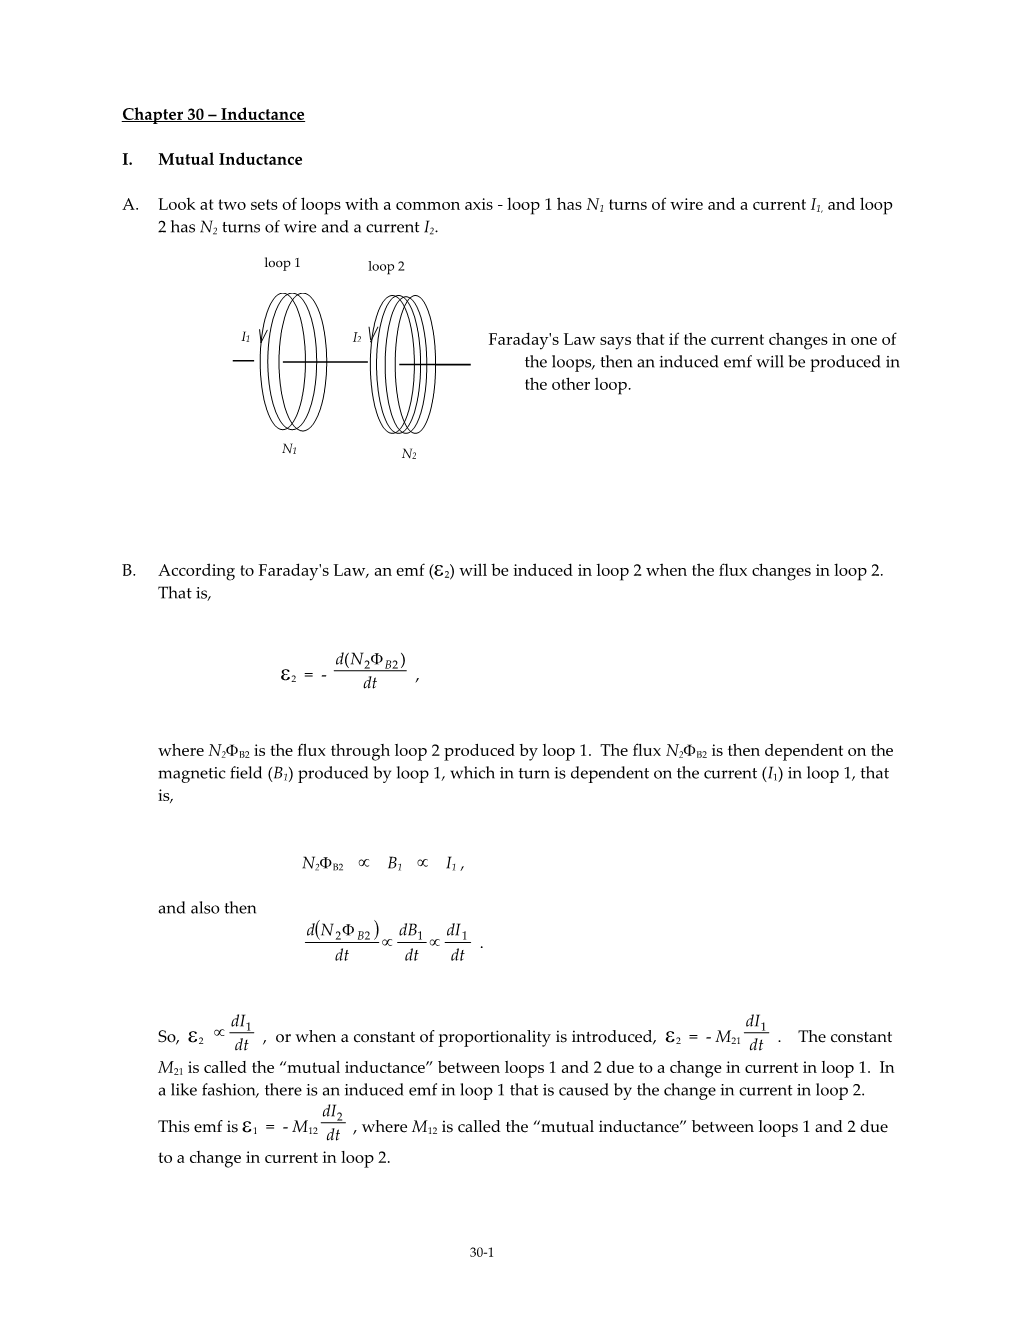 Chapter 31 Inductance and Magnetic Energy